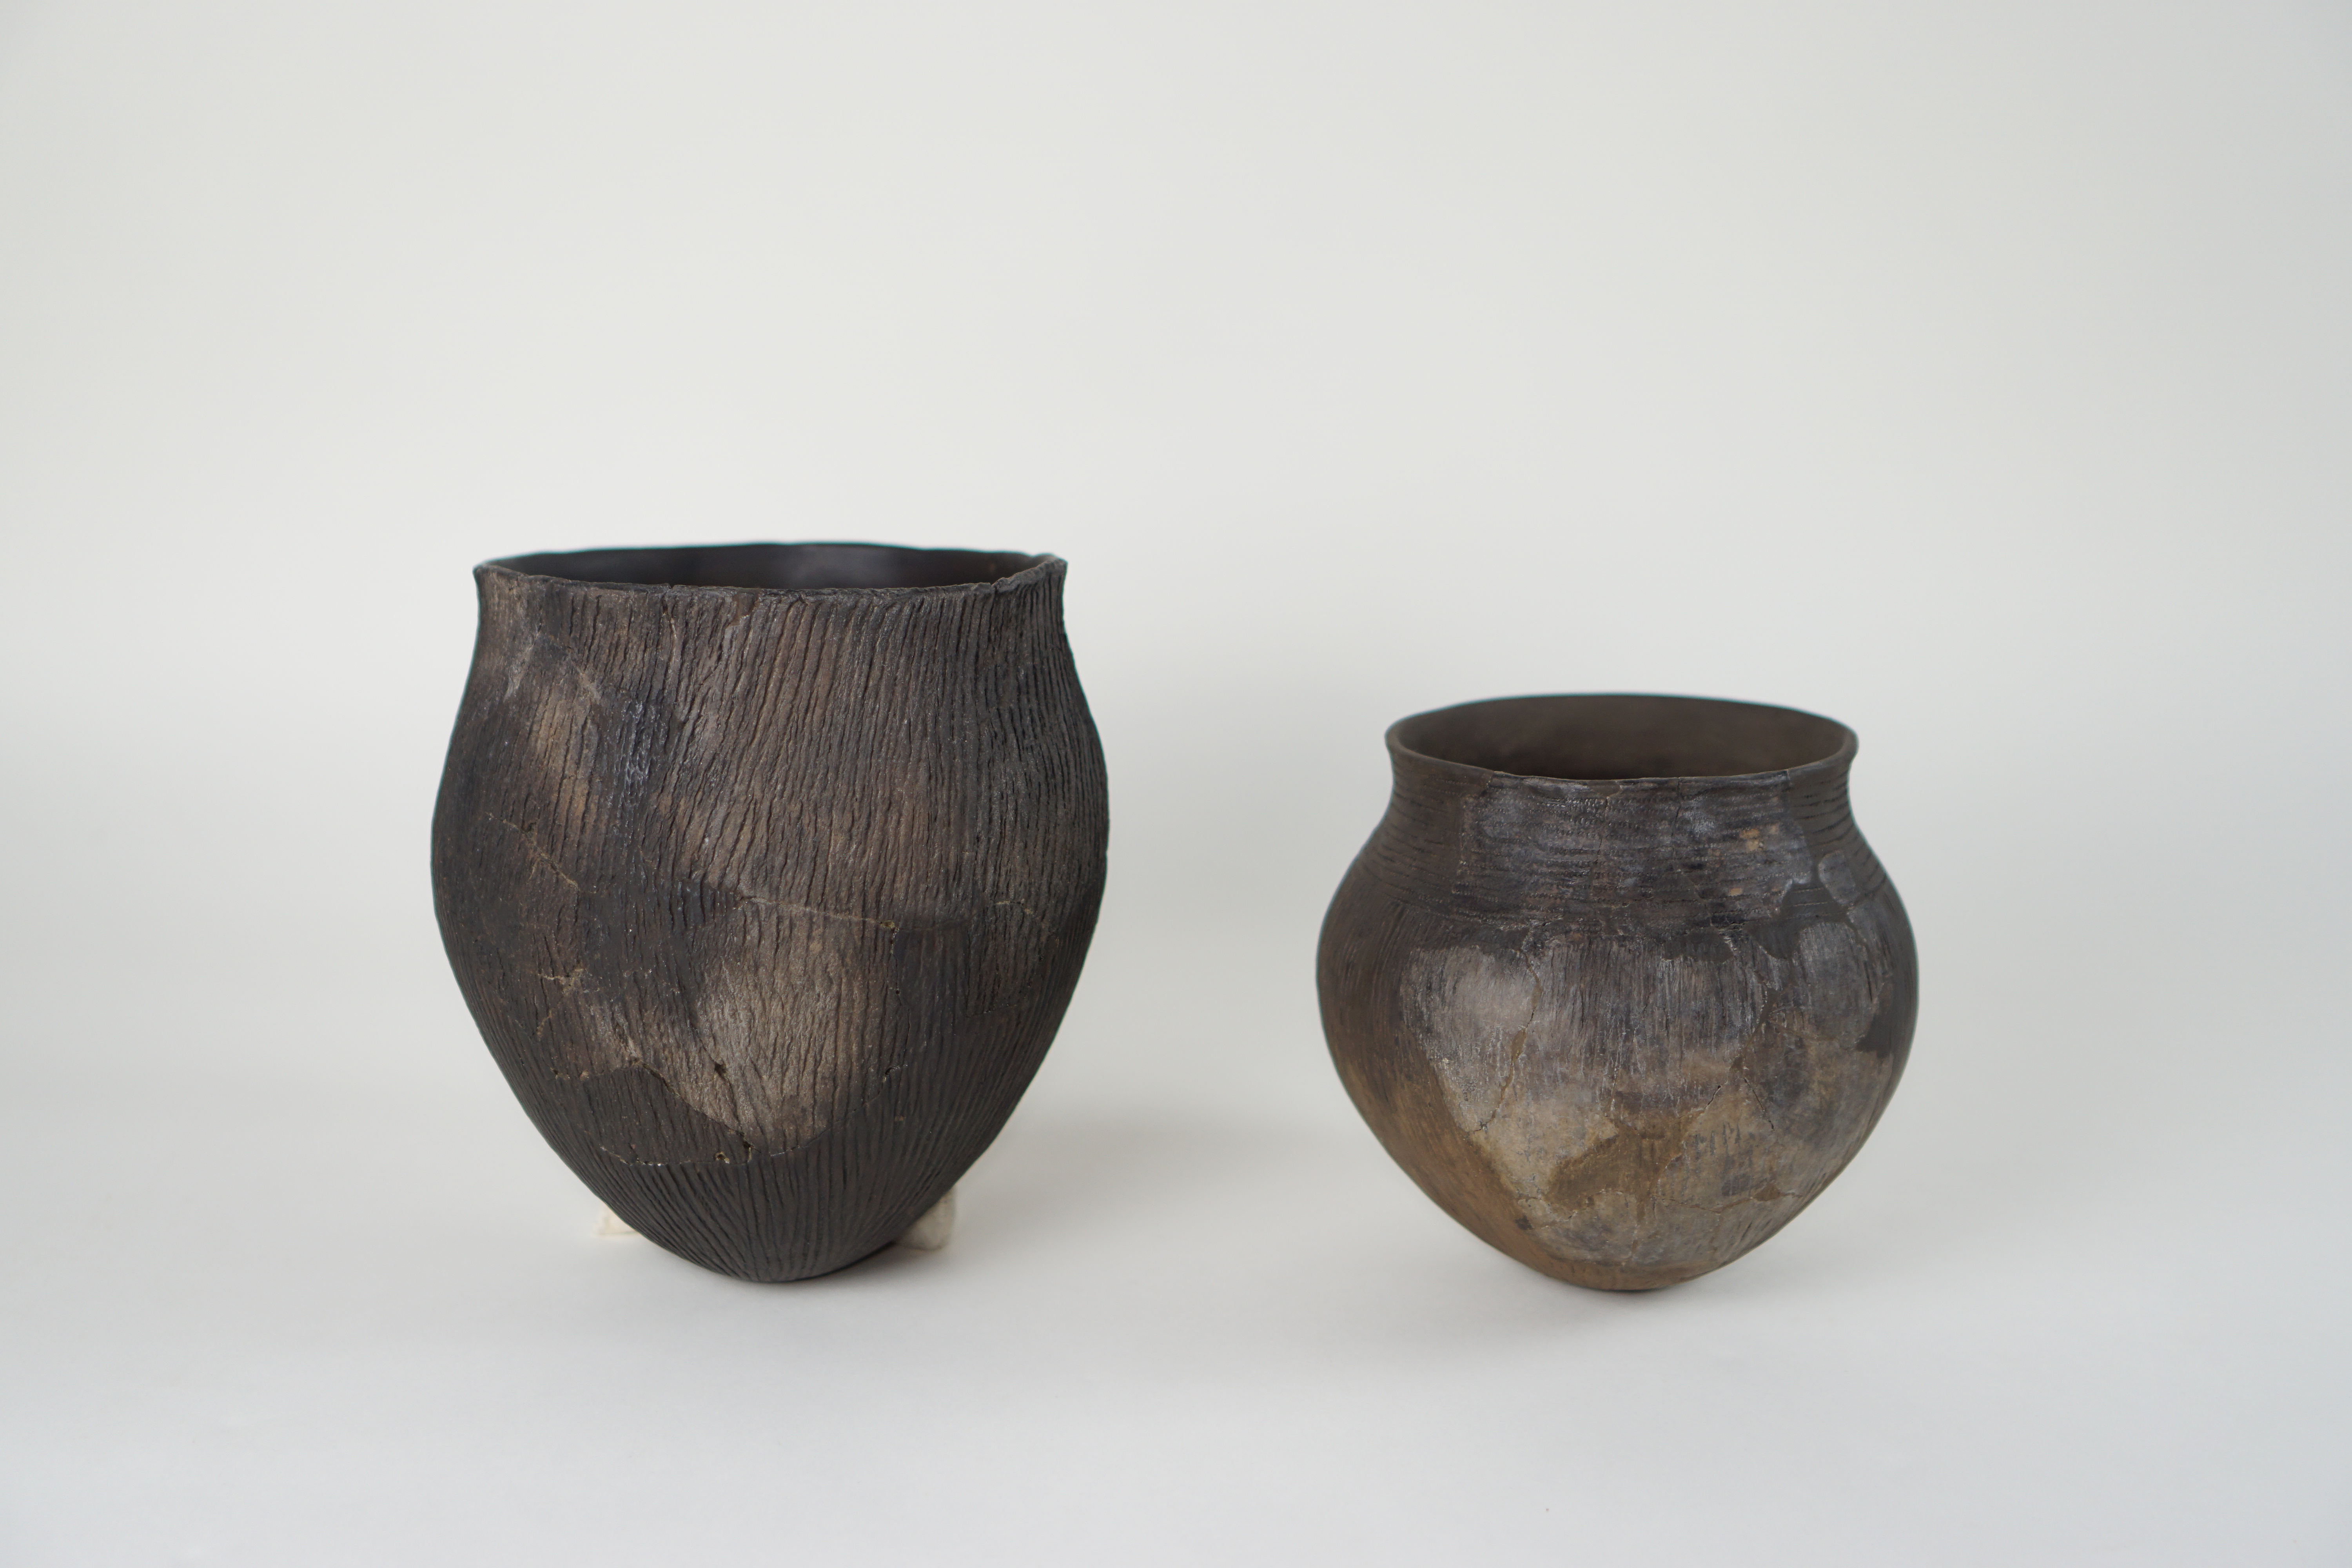 Two vases, one smaller and one larger 